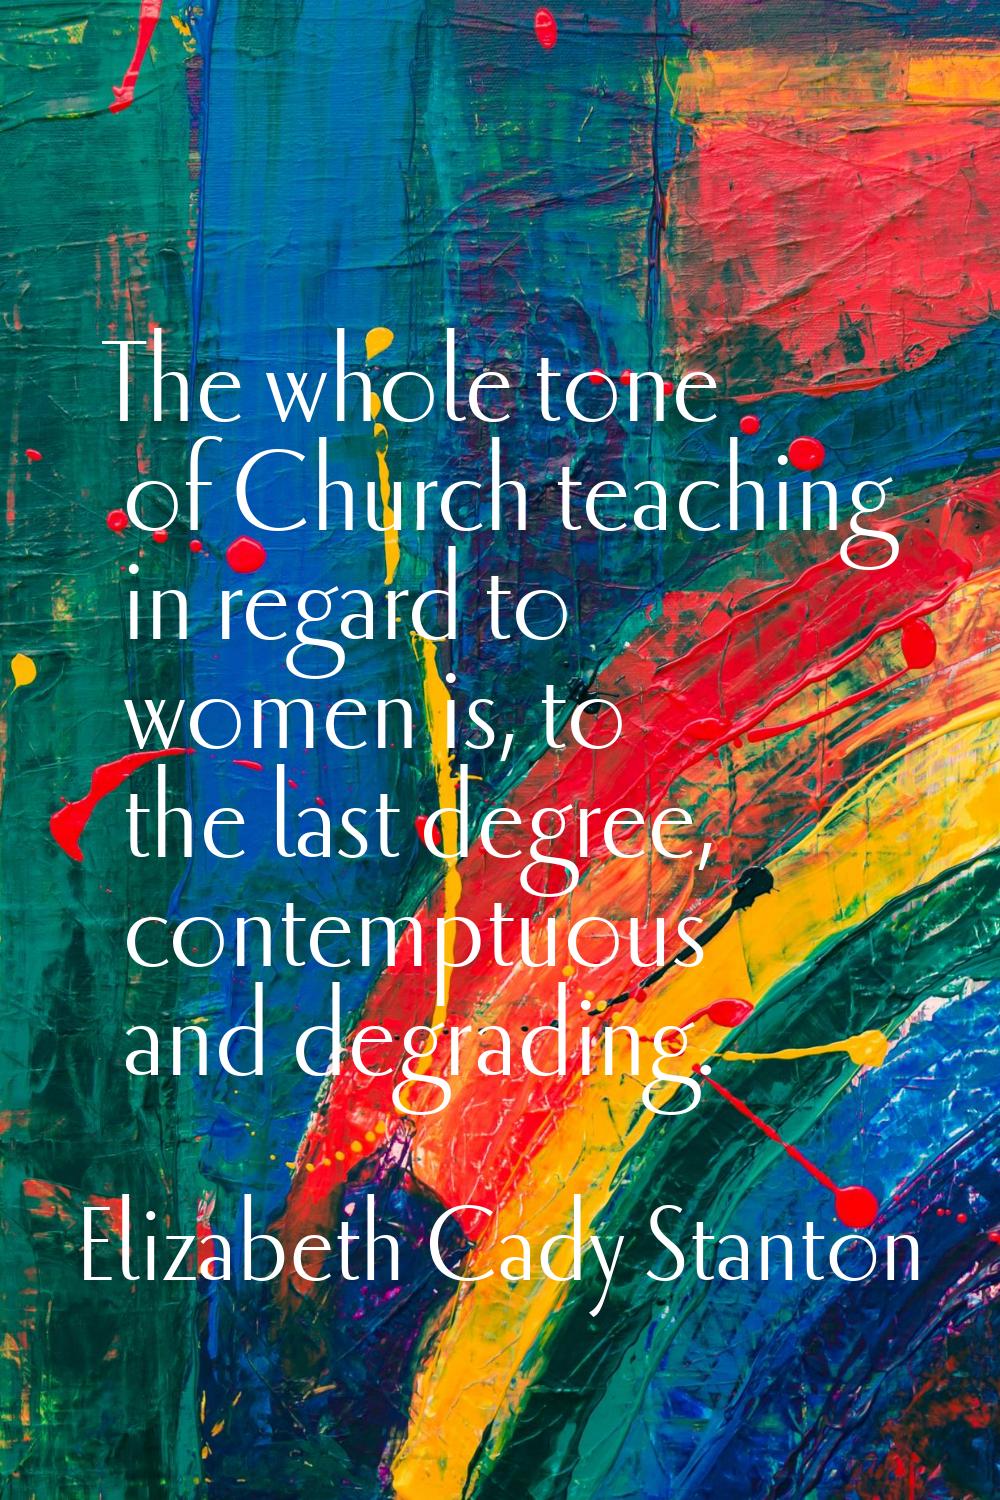 The whole tone of Church teaching in regard to women is, to the last degree, contemptuous and degra